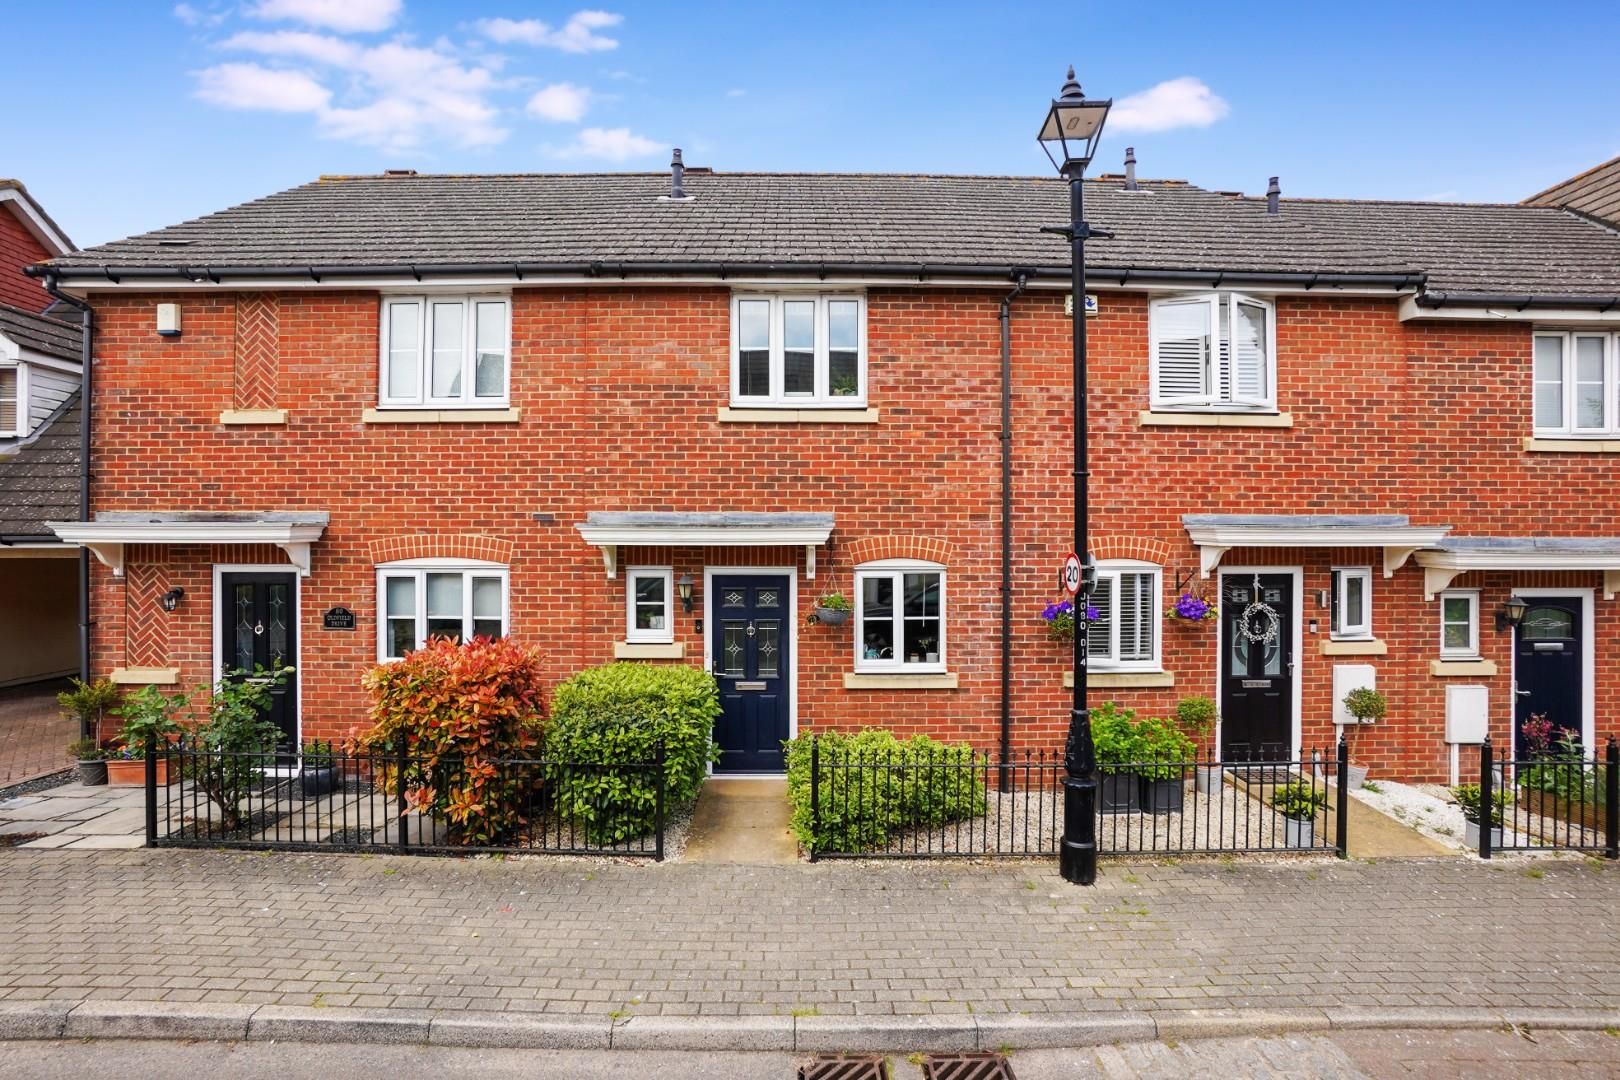 Oldfield Drive, Wouldham, Rochester, Kent, ME1 3GP